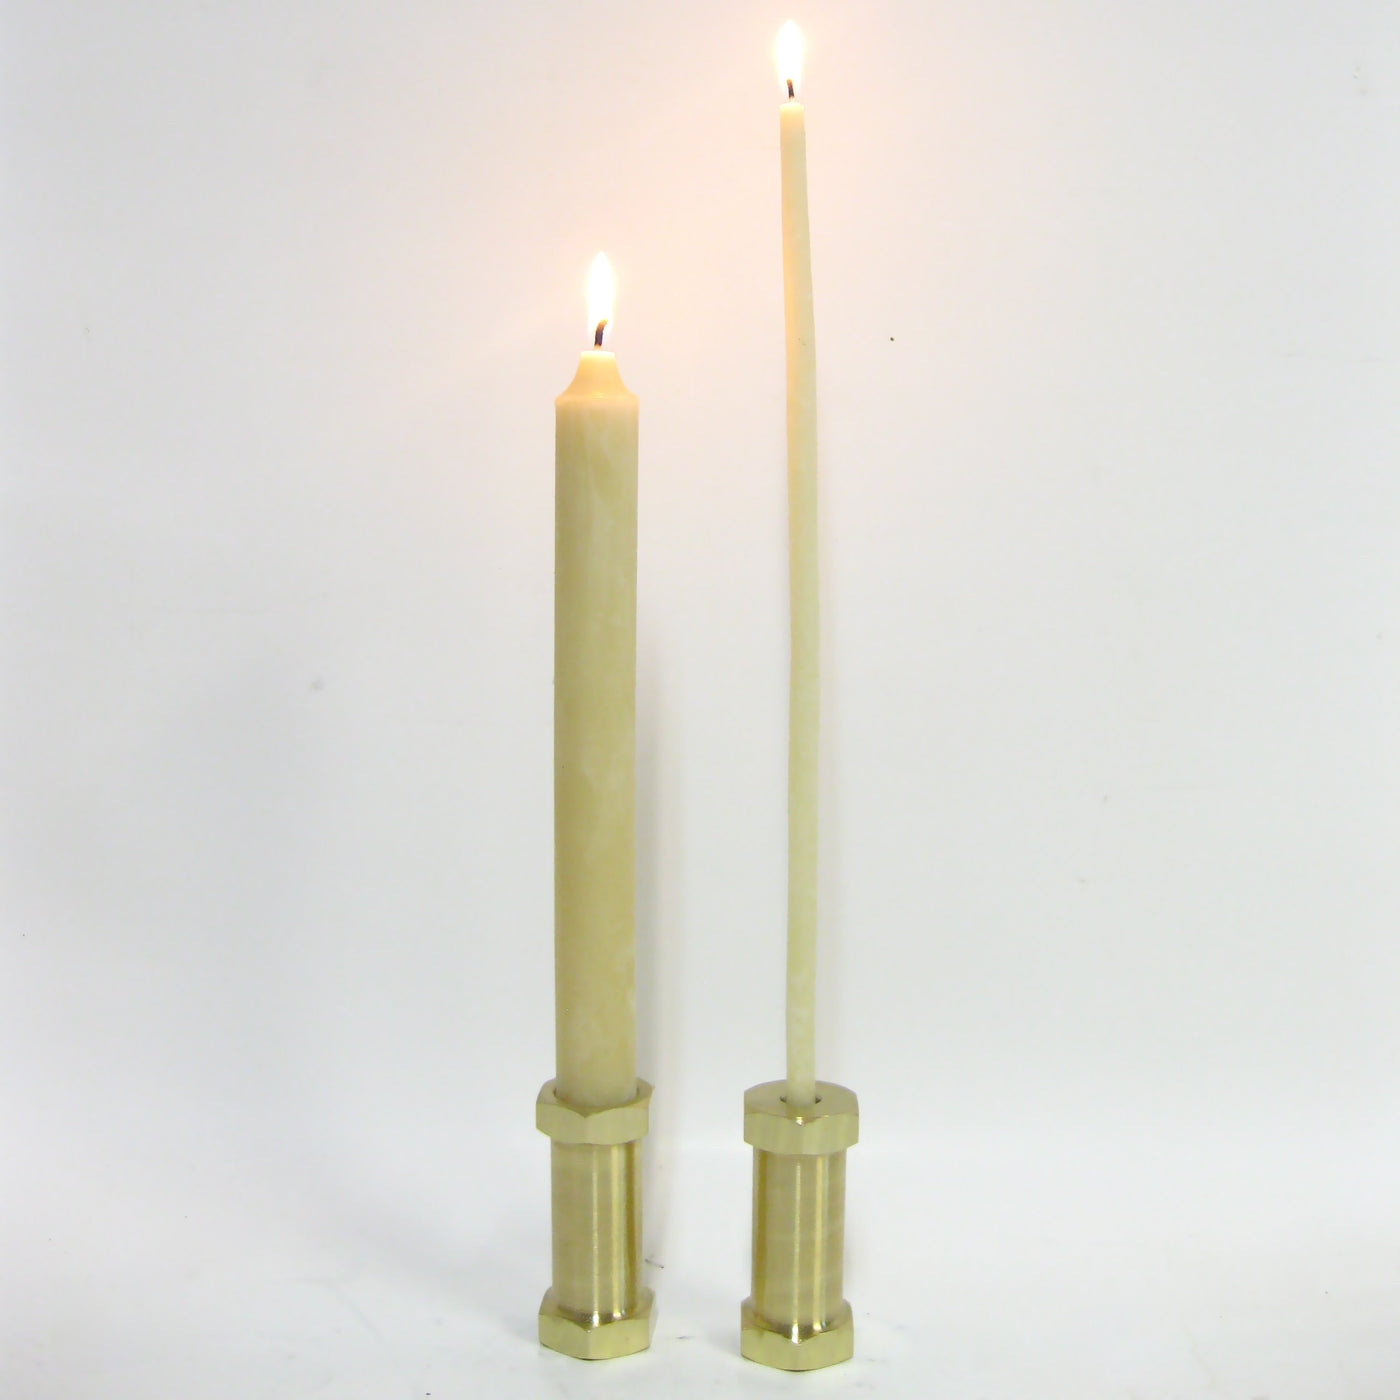 Queen B "Earthing Stubb" Candle Holder